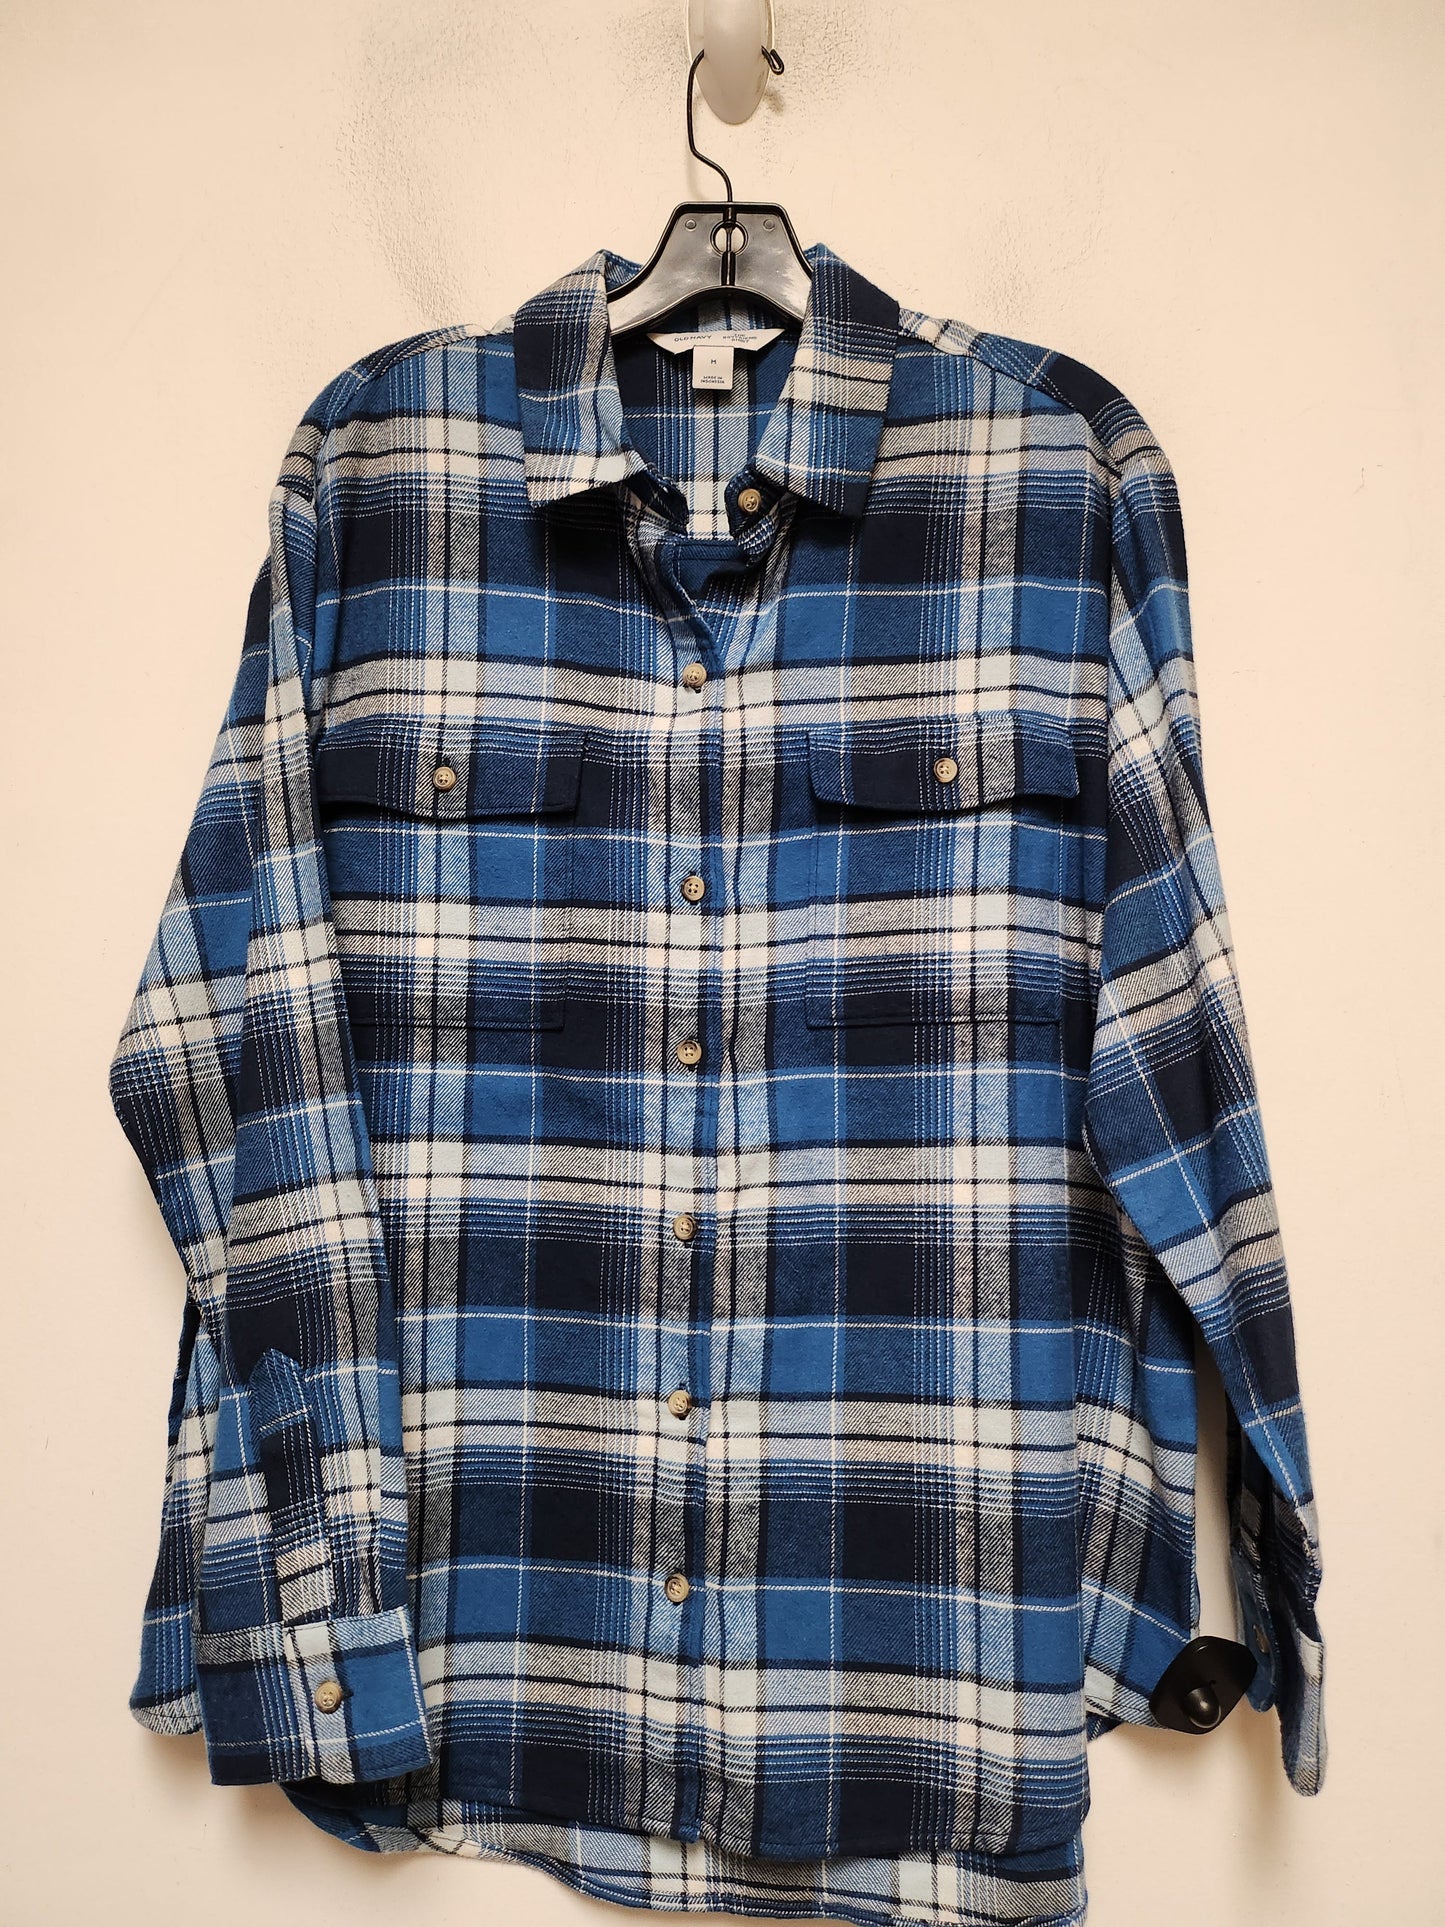 Plaid Pattern Top Long Sleeve Old Navy, Size M